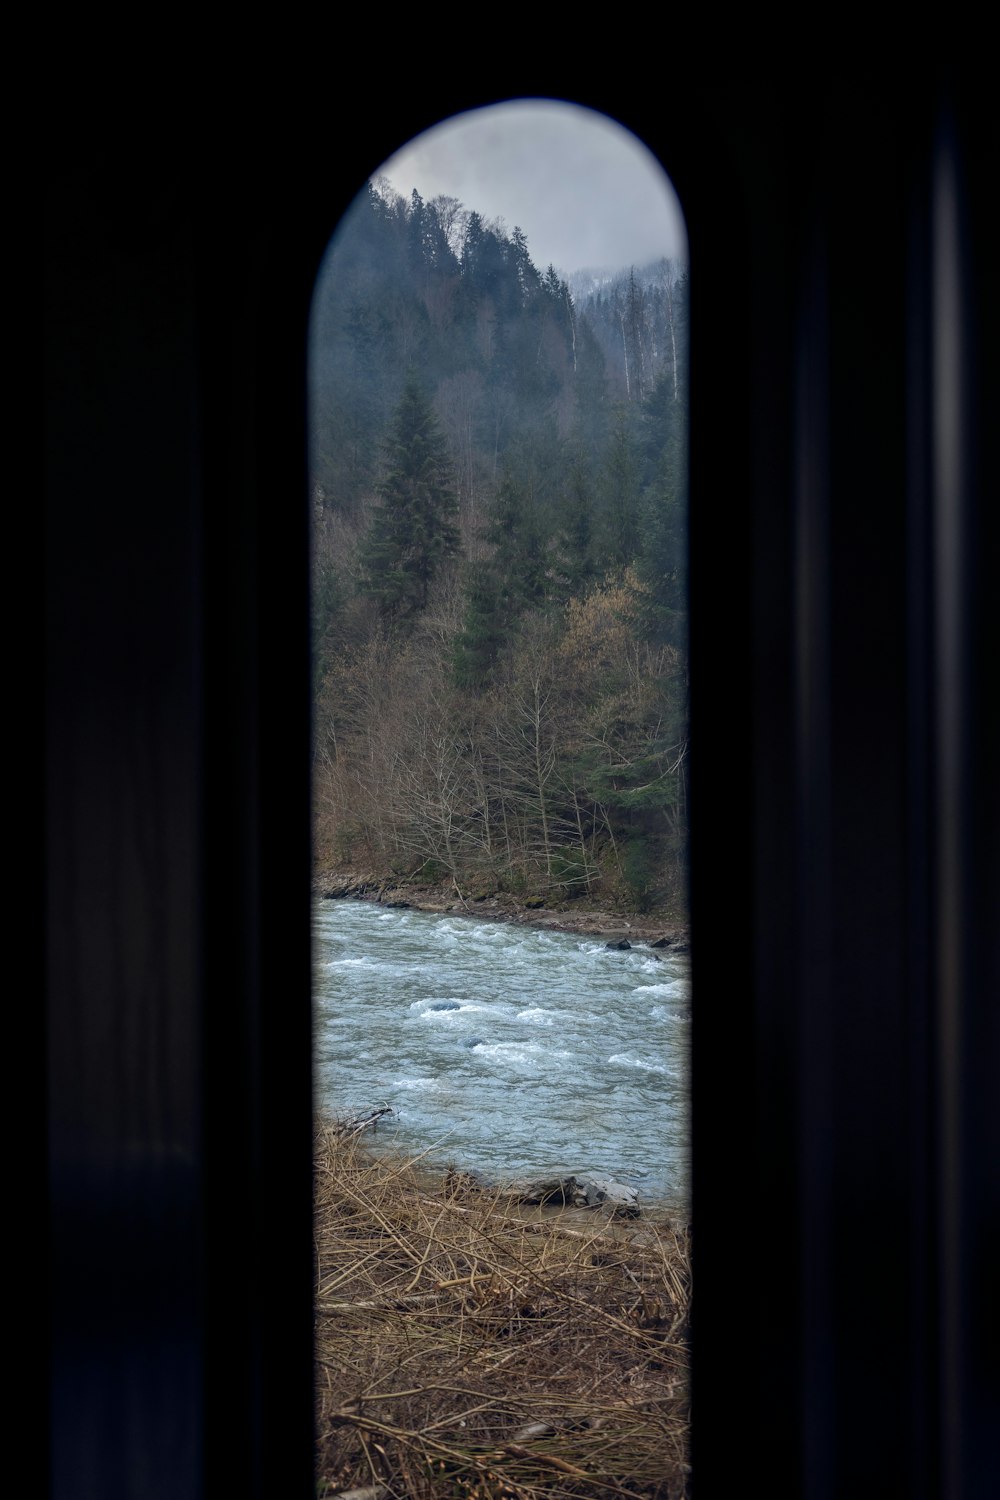 a view of a river through a window